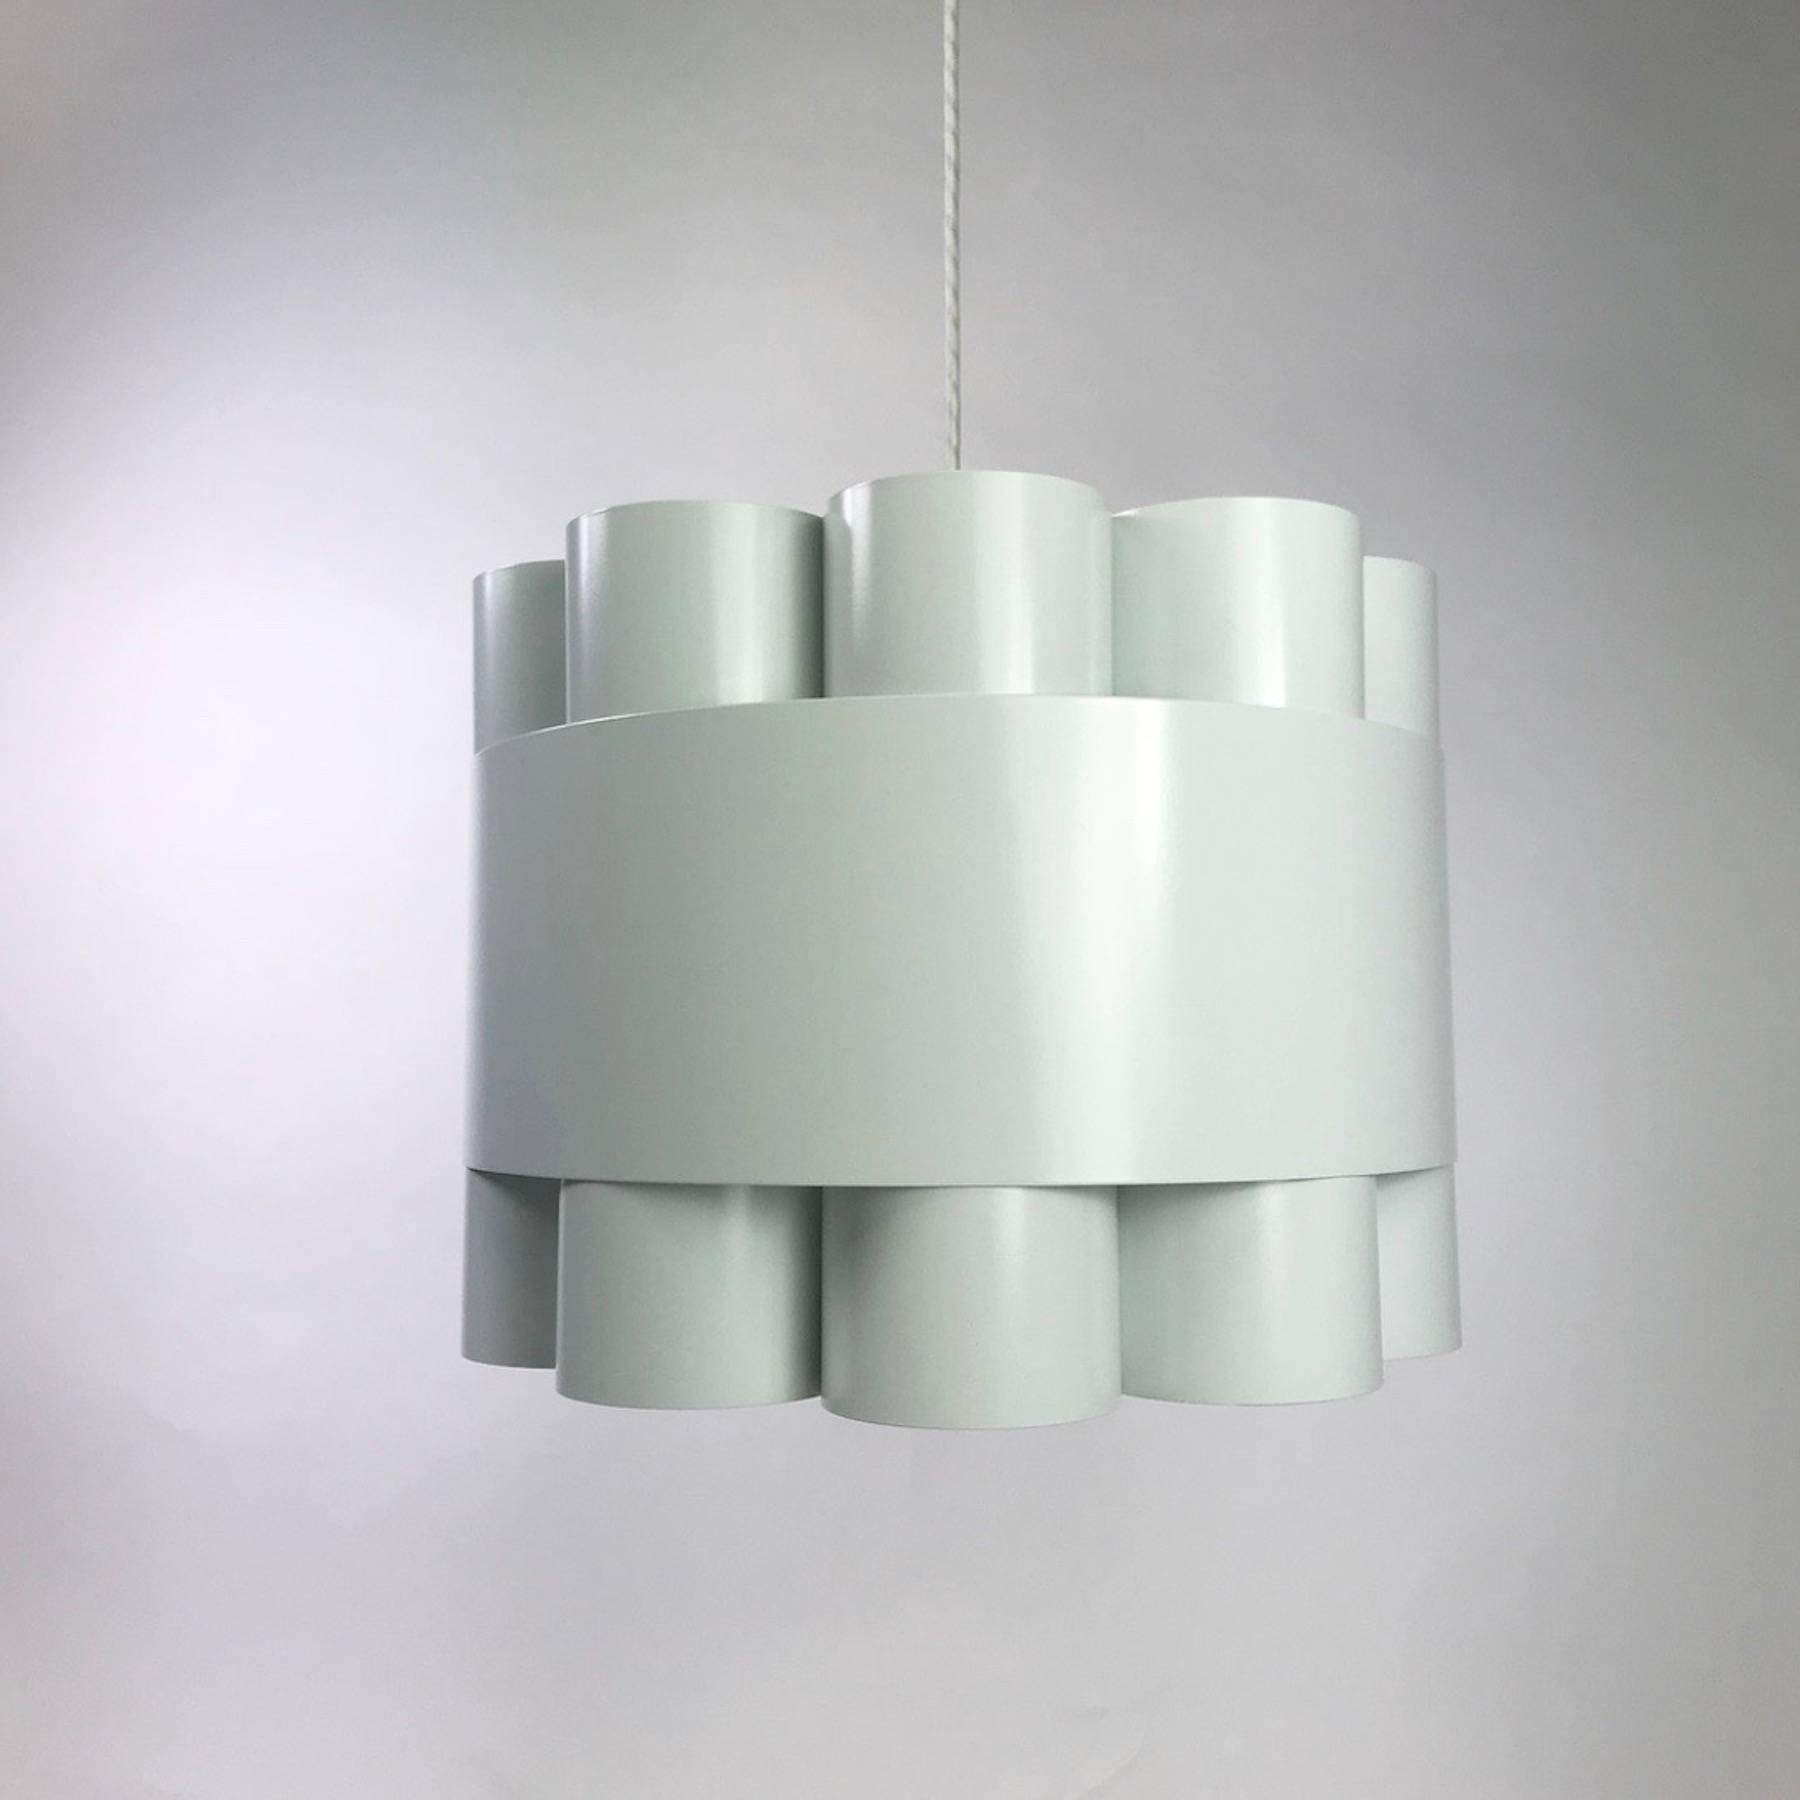 Designed in 1972 this beautiful Zero by Jo Hammerborg for Fog Mørup is a stunning contemporary design piece.

The light consists of tubular shaped shades and the light effect is absolutely beautiful. 

Huge in size and heavy thick lacquered